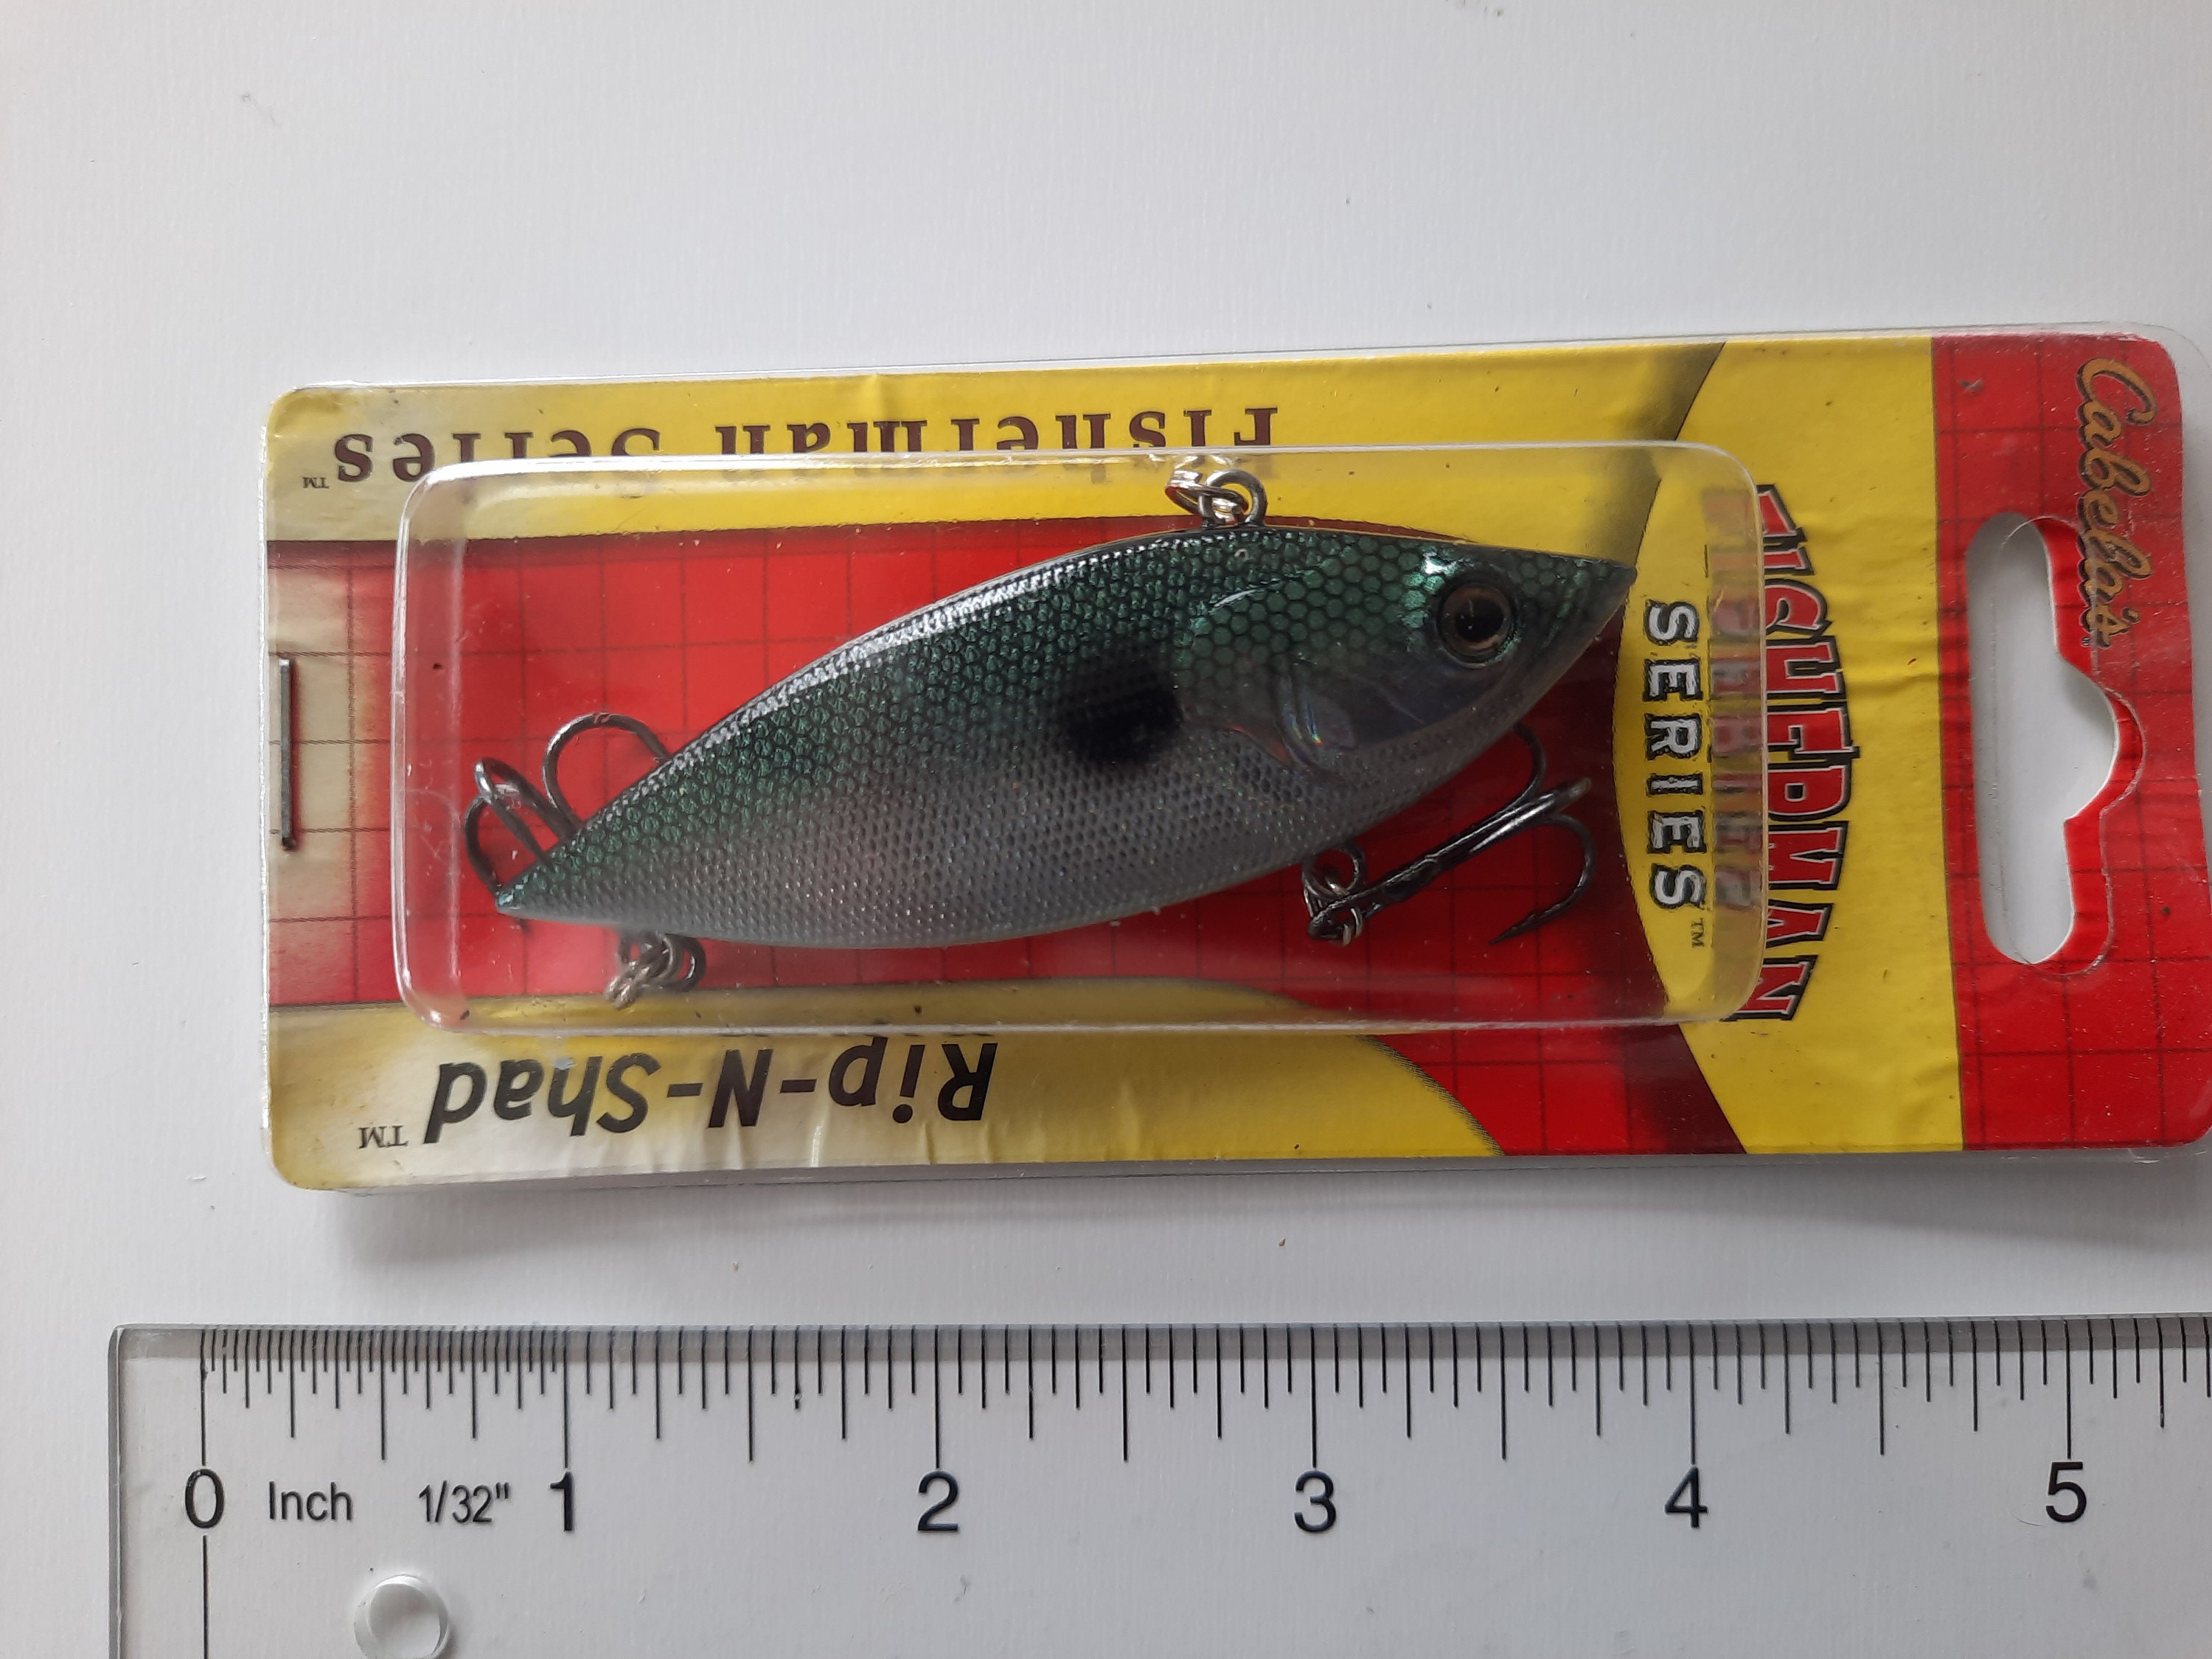 Vintage 1980s Bass Lure: Cabela's Fisherman Series, Rip-n-shad, Natural  Gizzard Shad, 1/2 Oz., 3.0 Scarce, Unused in Original Package 